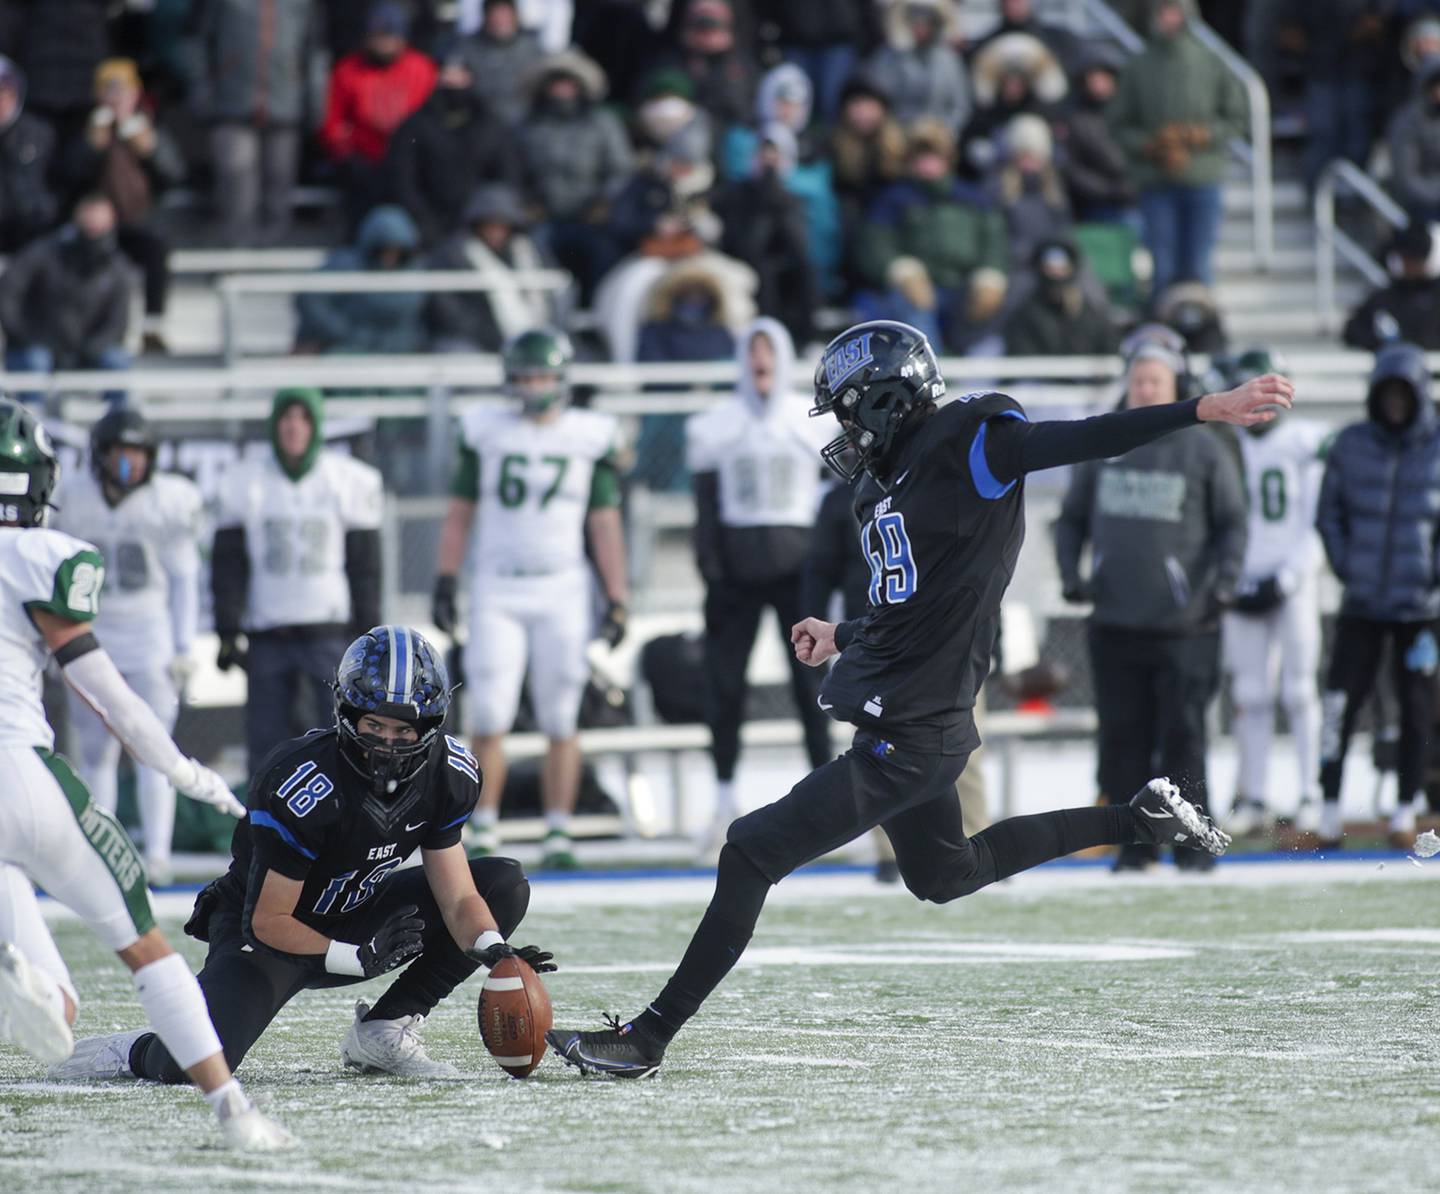 Lincoln-Way East’s Carter Nair (49) kicks a 43-yard field goal against Glenbard West during a Class 8A state semifinal game in Frankfort on Saturday, Nov. 19, 2022.